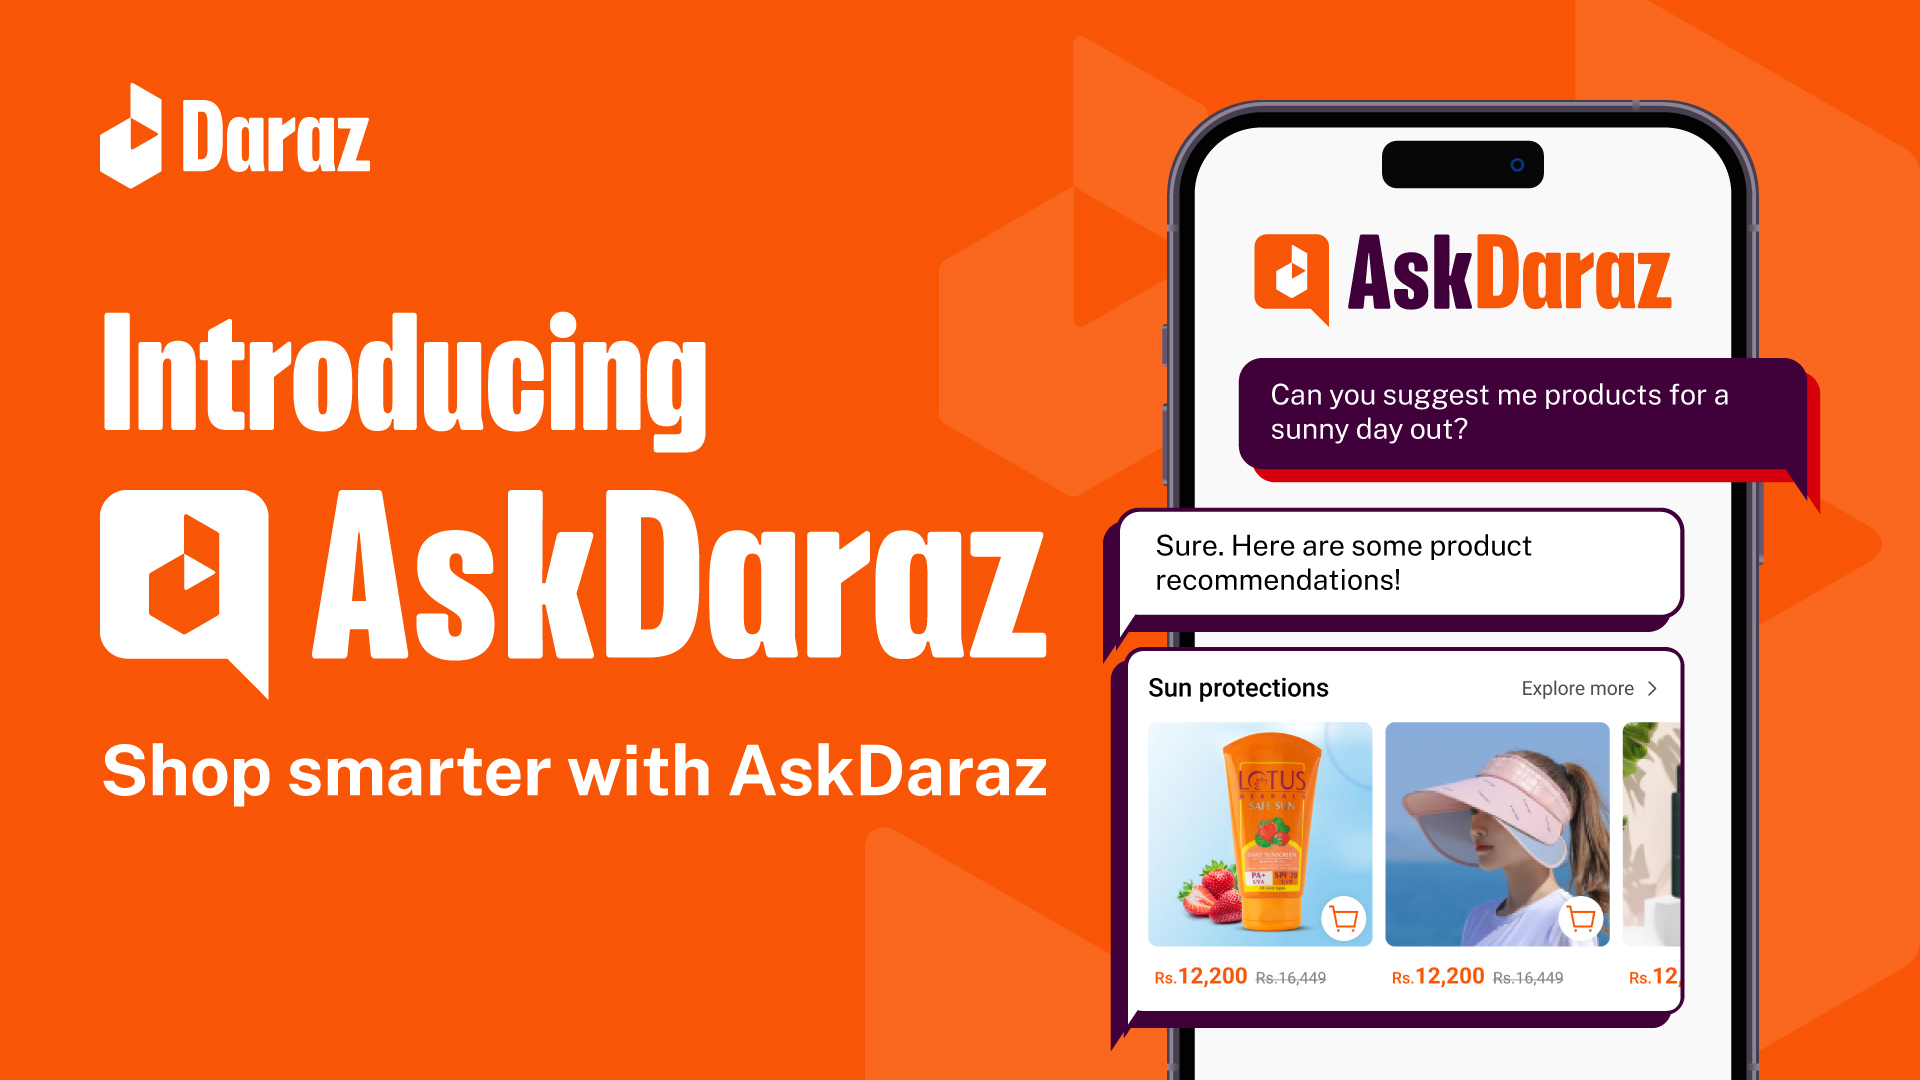 Over 1.2 million orders were influenced by Daraz Live campaigns and streams in 2022 — Daraz